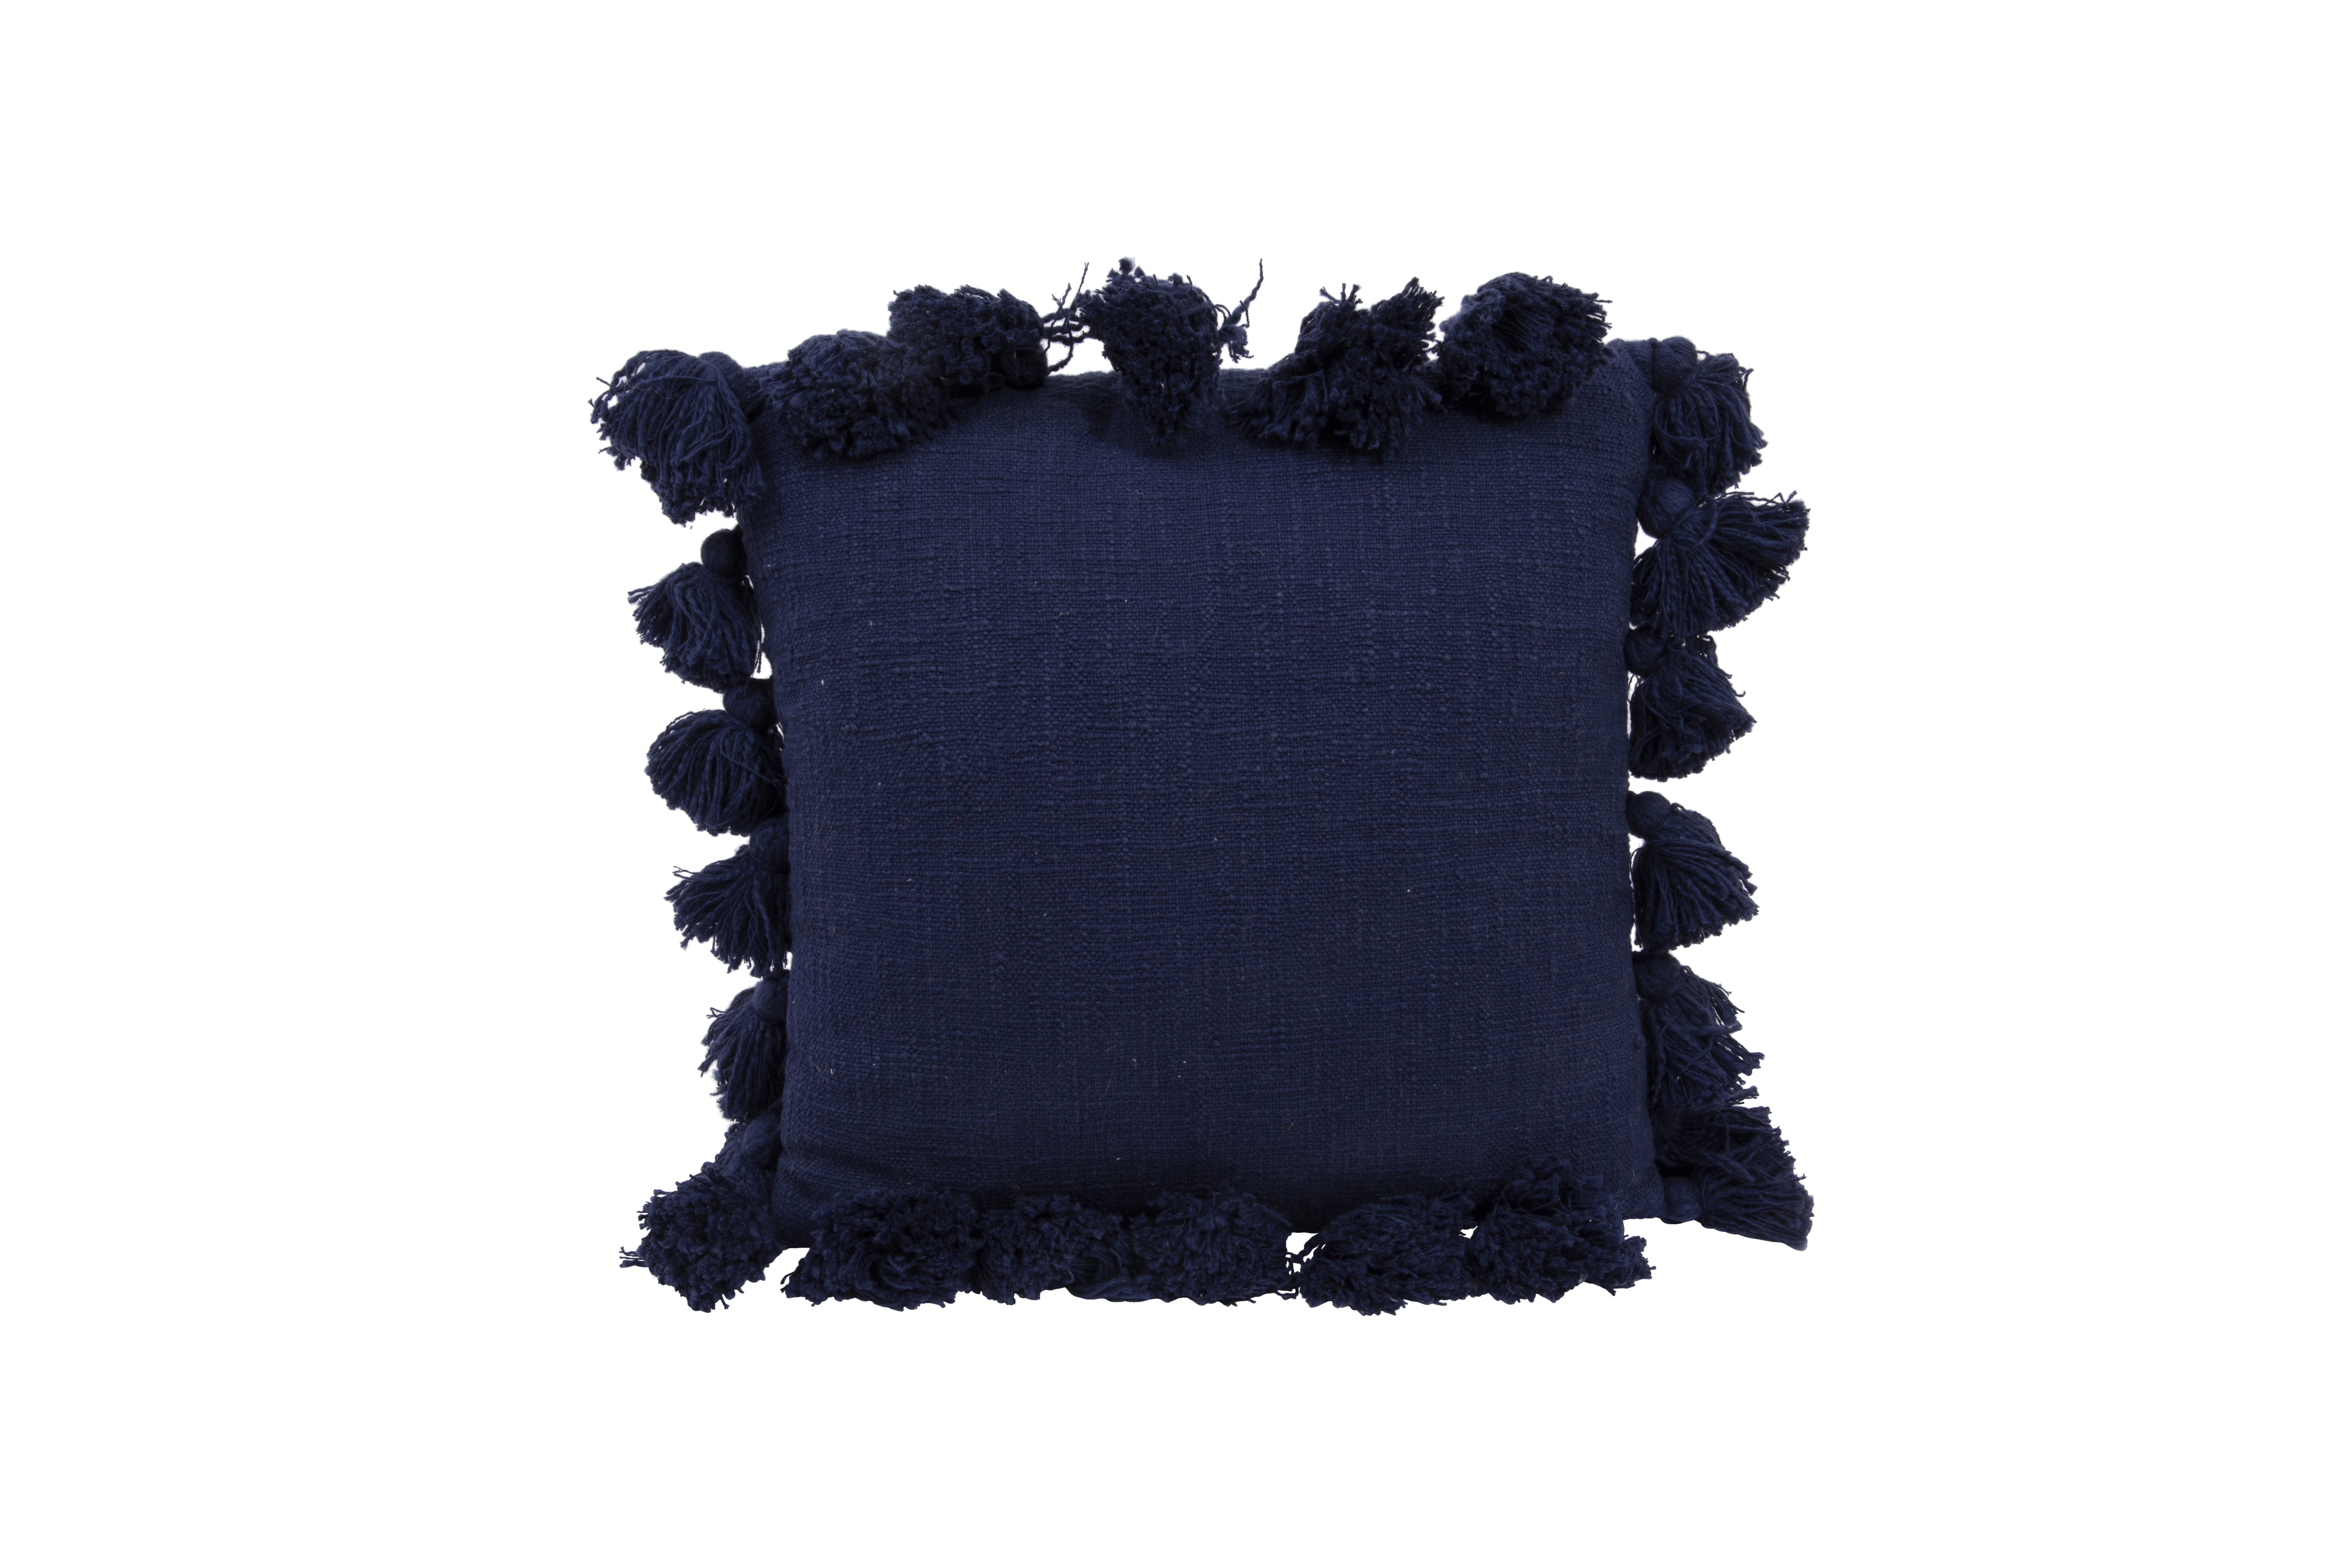 Square Cotton Pillow with Tassels, Navy Blue, 18" x 18" - Nomad Home